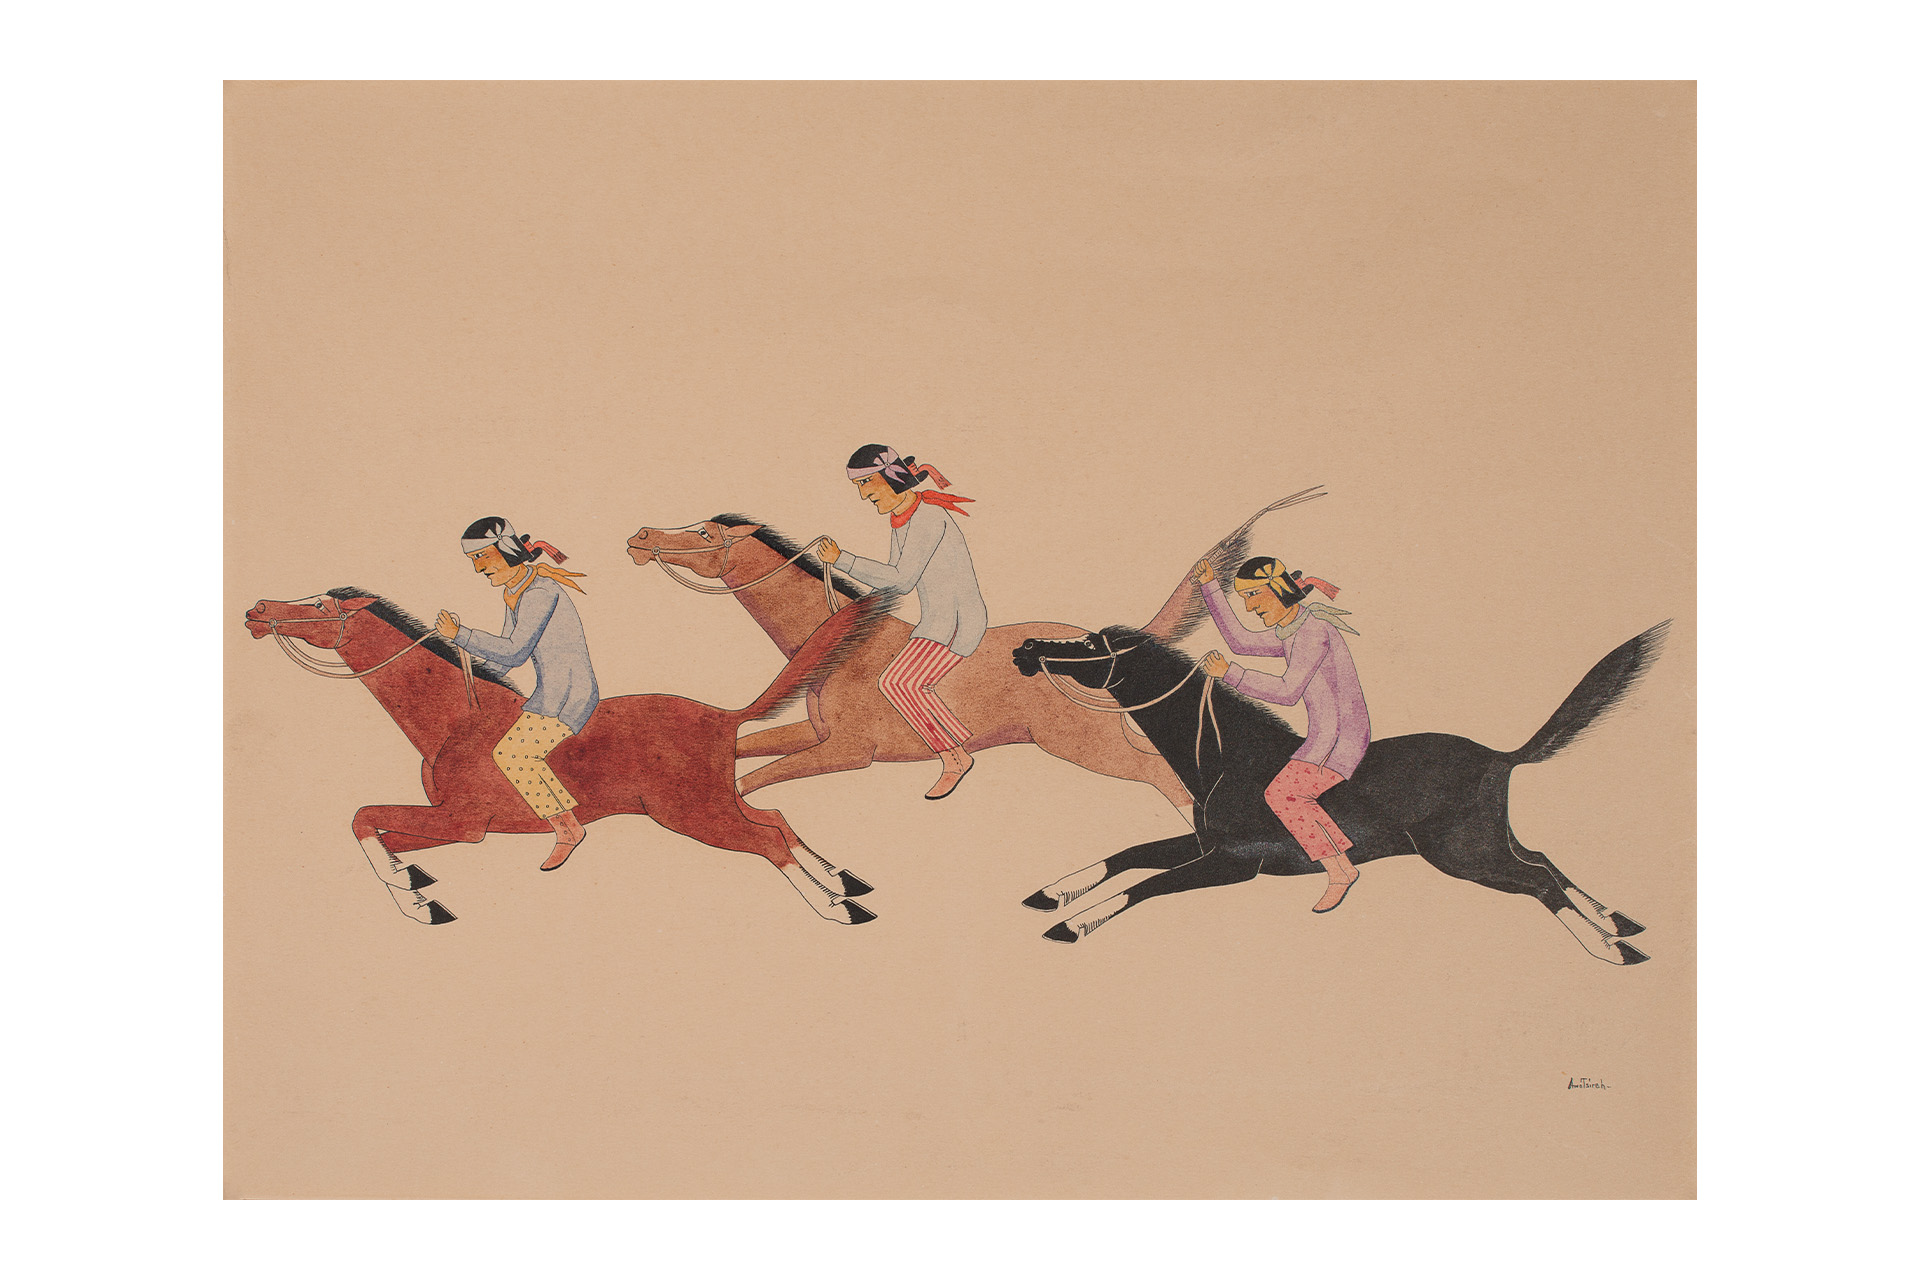 A painting of a group of people riding horses on a beige background.